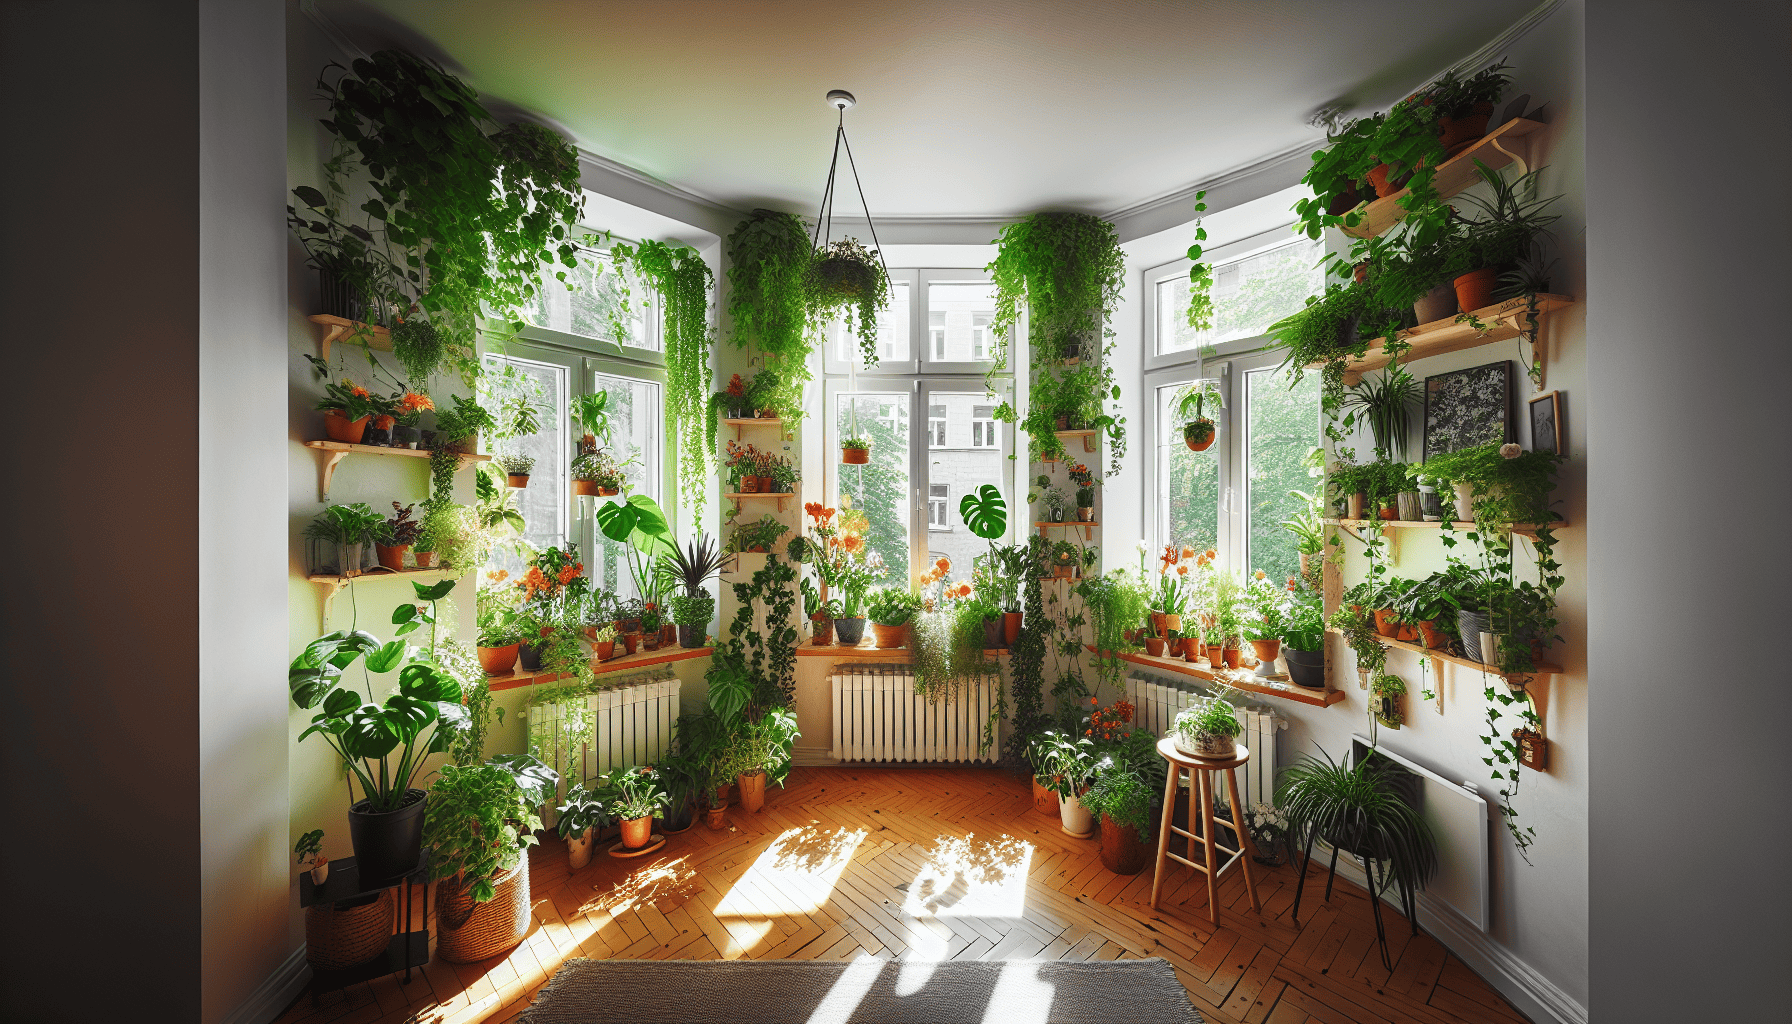 Space-saving vertical garden ideas for small apartments including window box arrangements